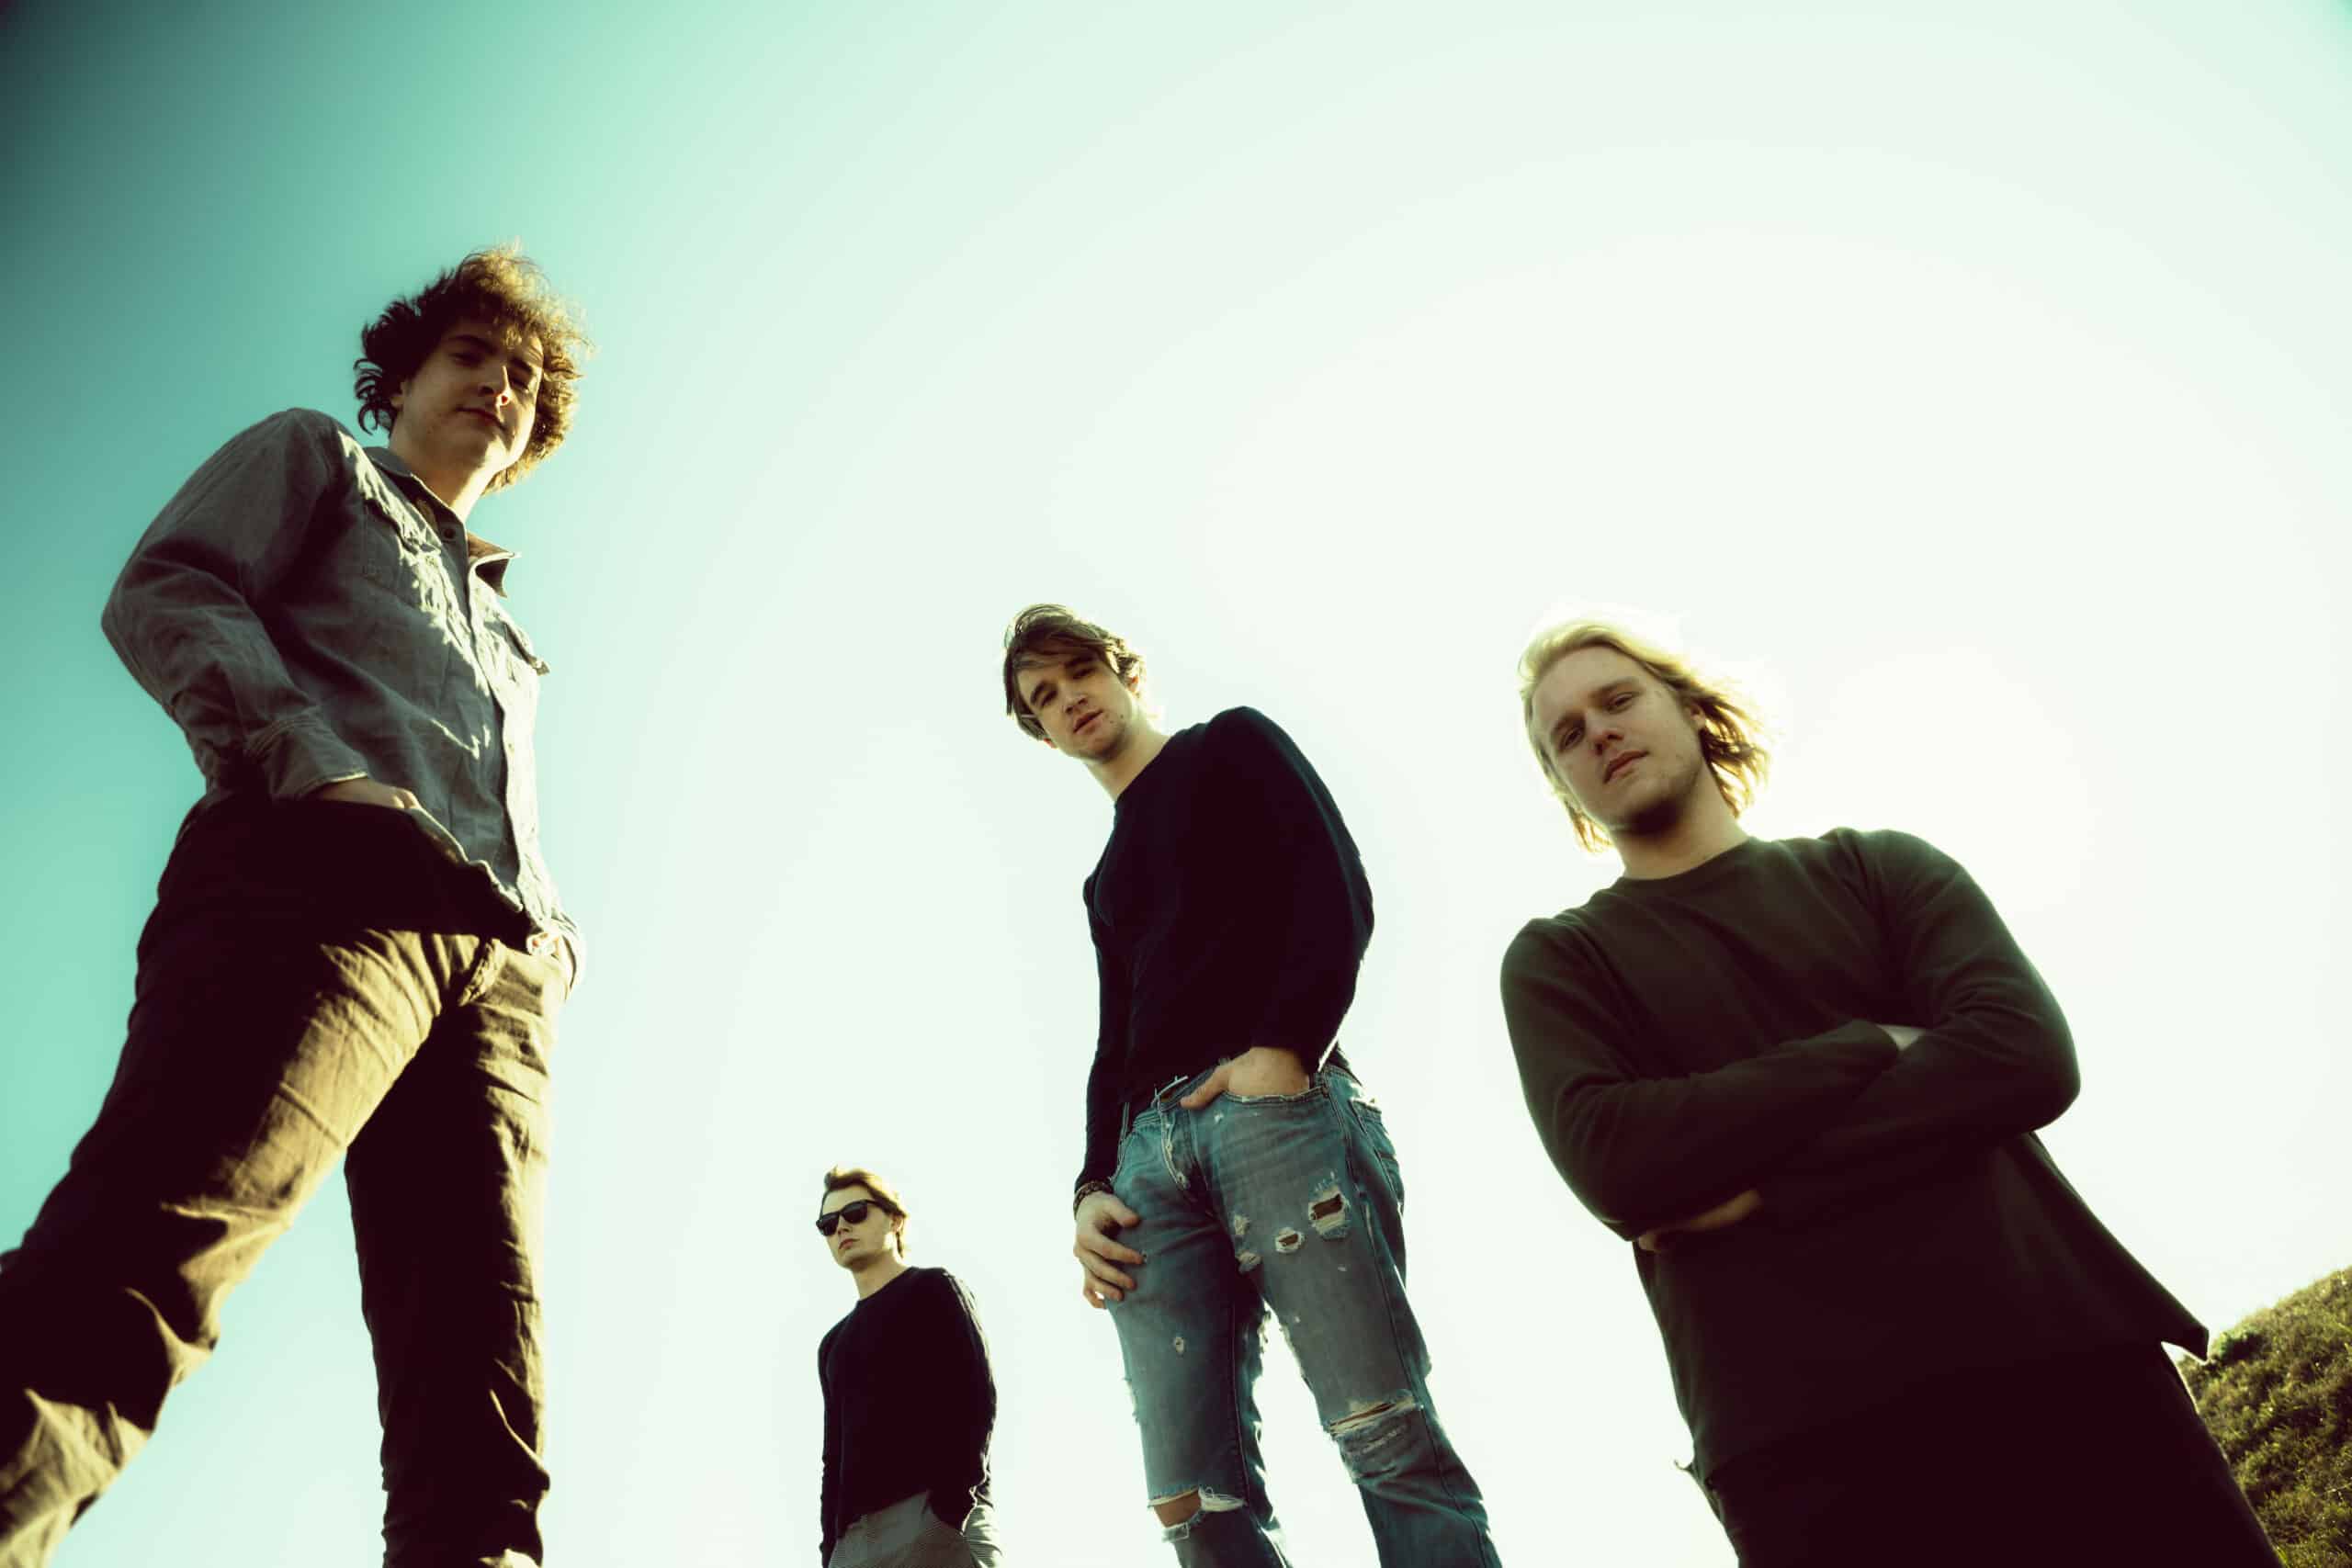 Four individuals, heralding new music, stand outdoors against a clear sky, photographed from a low angle.